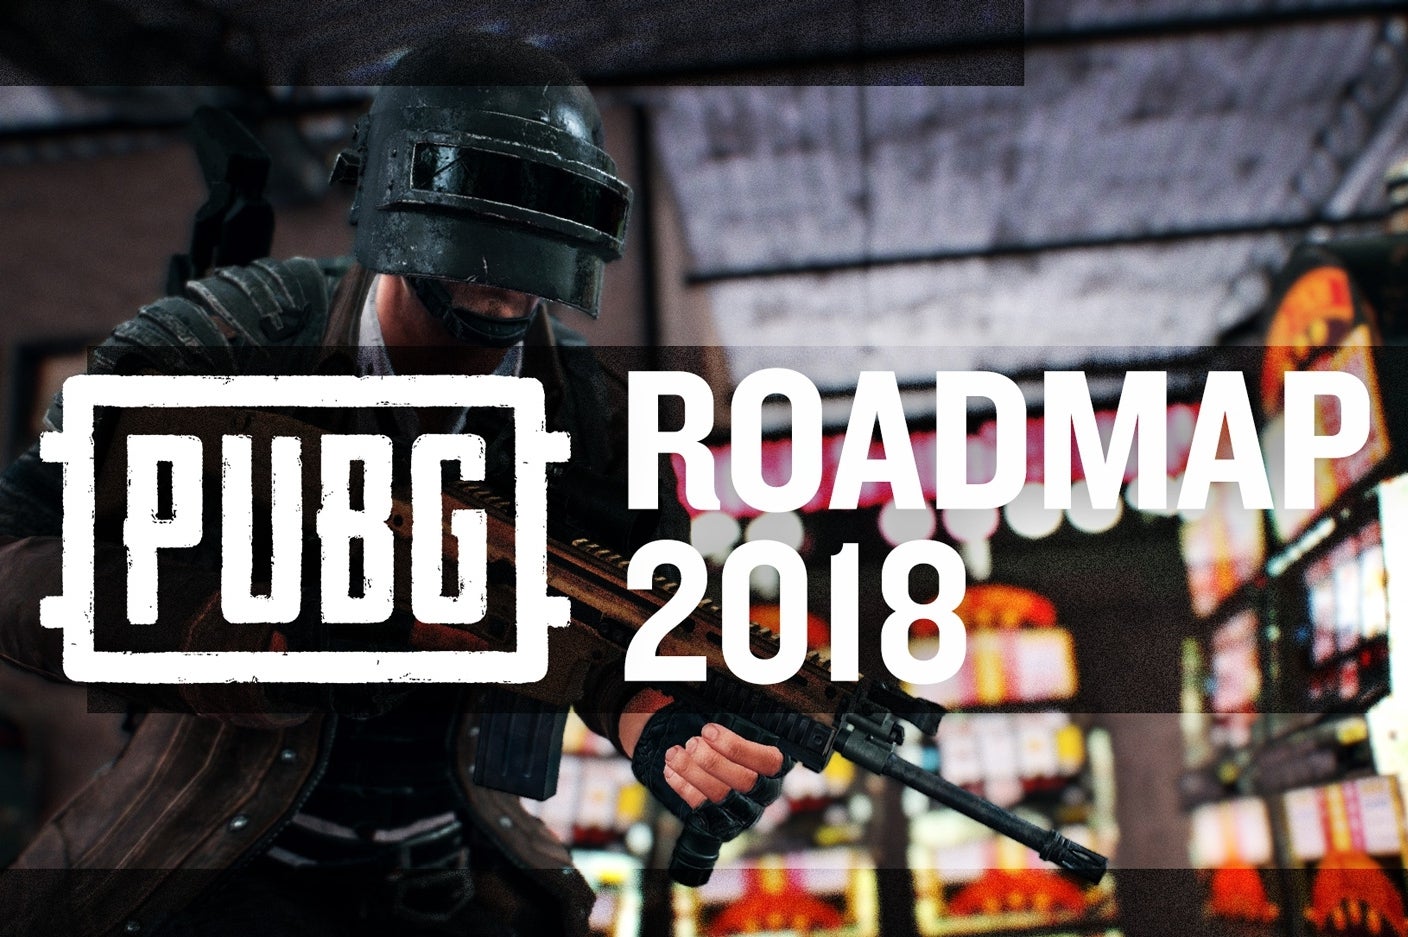 Image for PUBG roadmap explained - all the new features and updates coming in the Xbox Roadmap and on PC